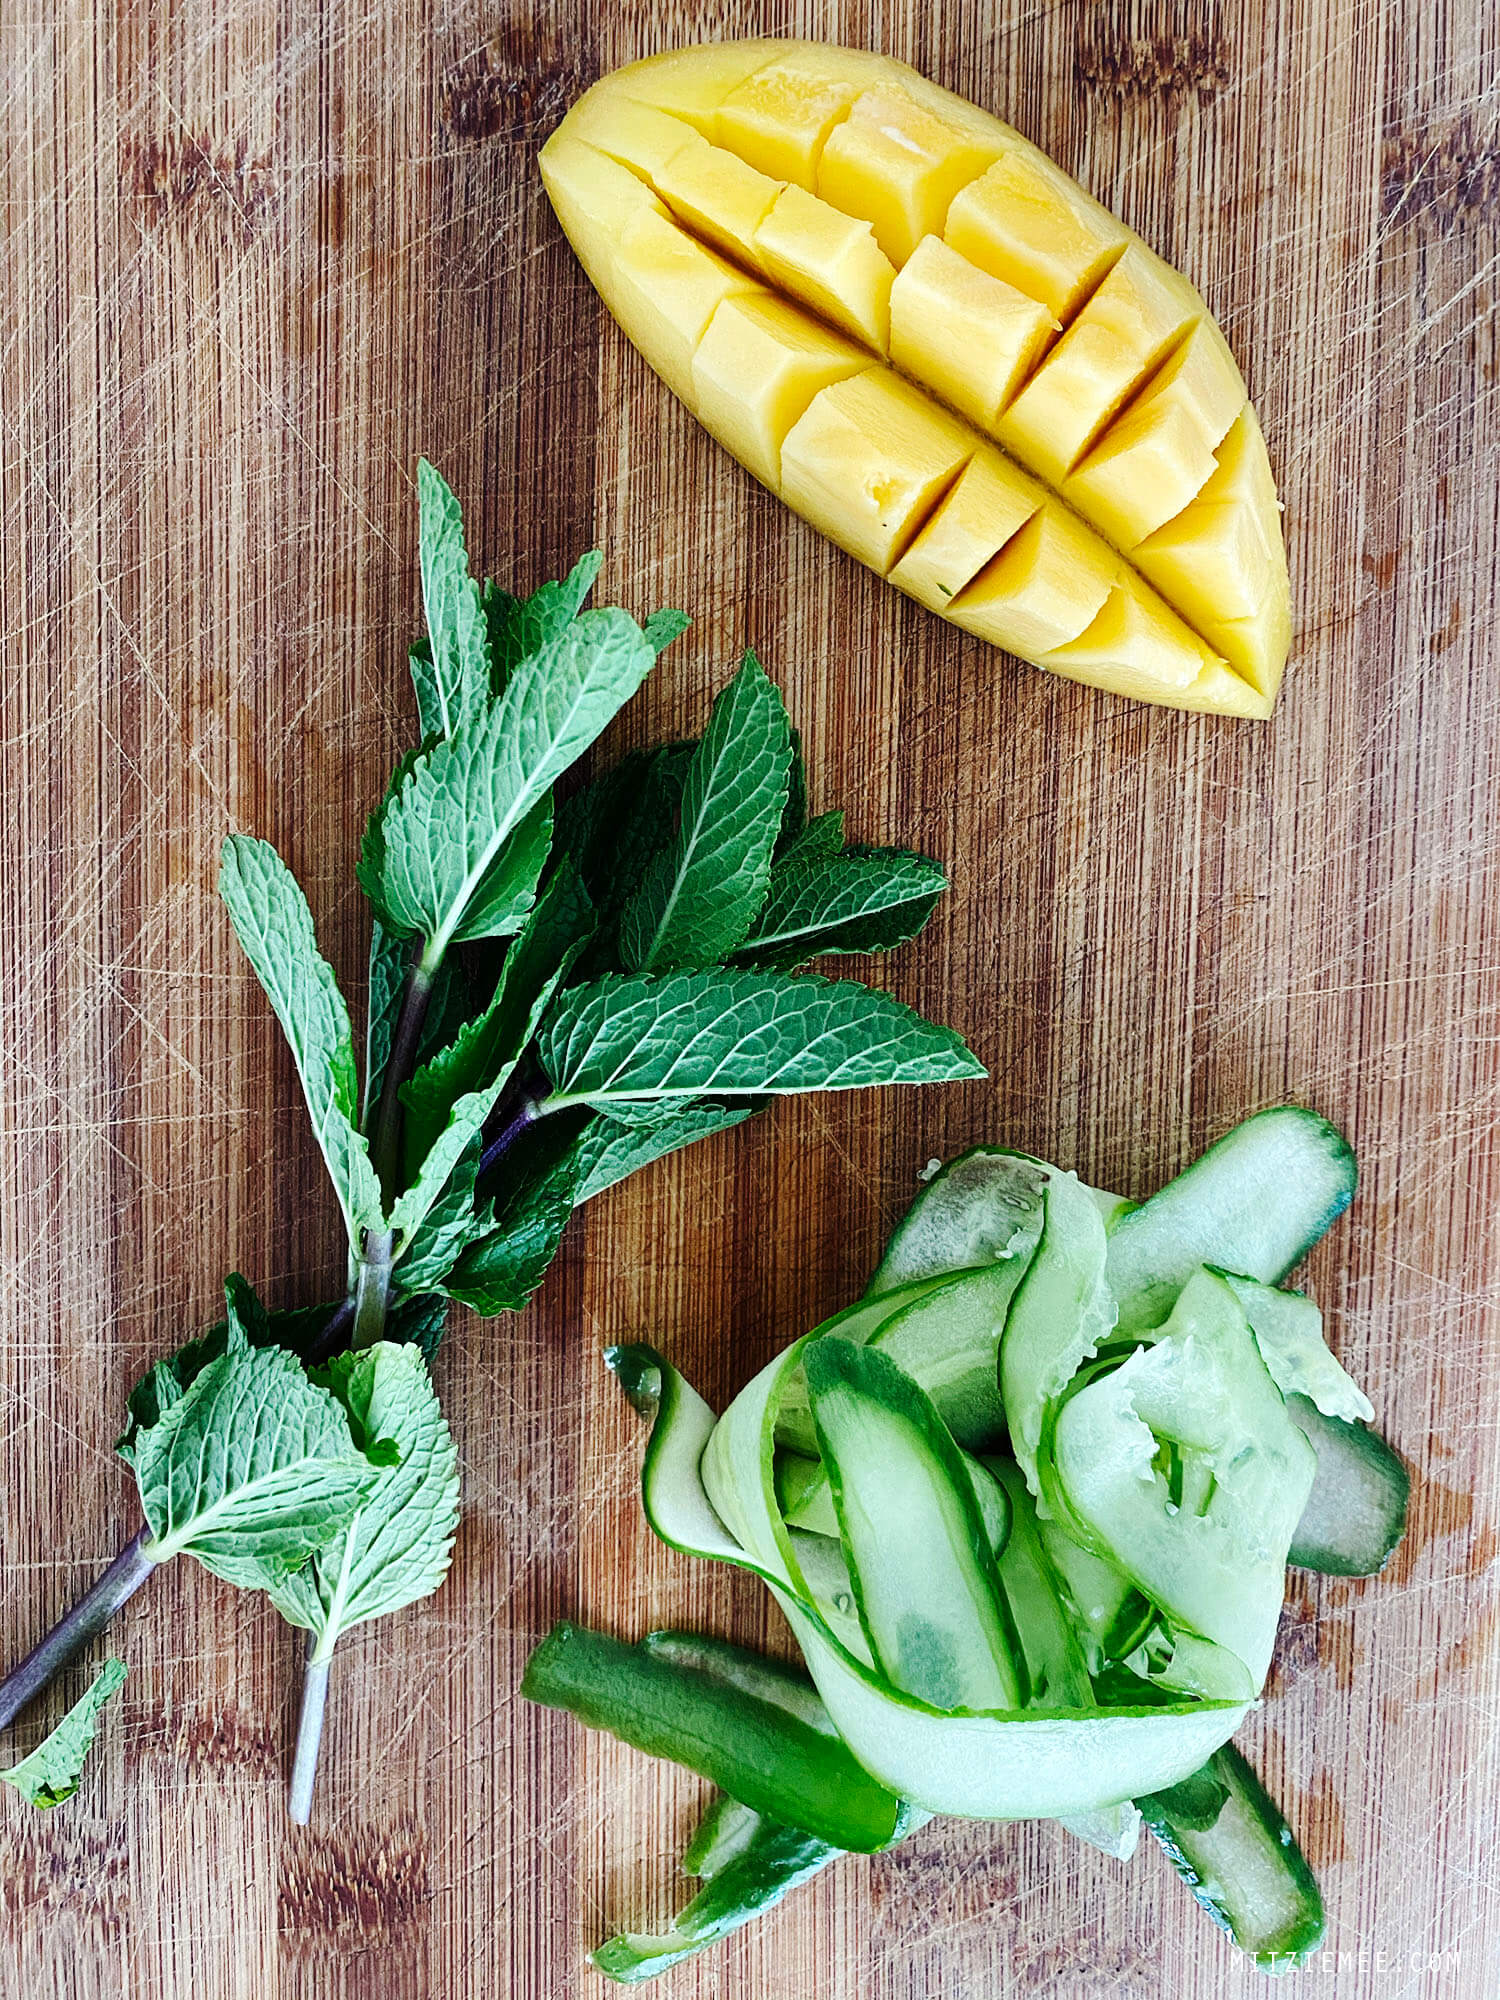 Infused water with mango, mint and cucumber